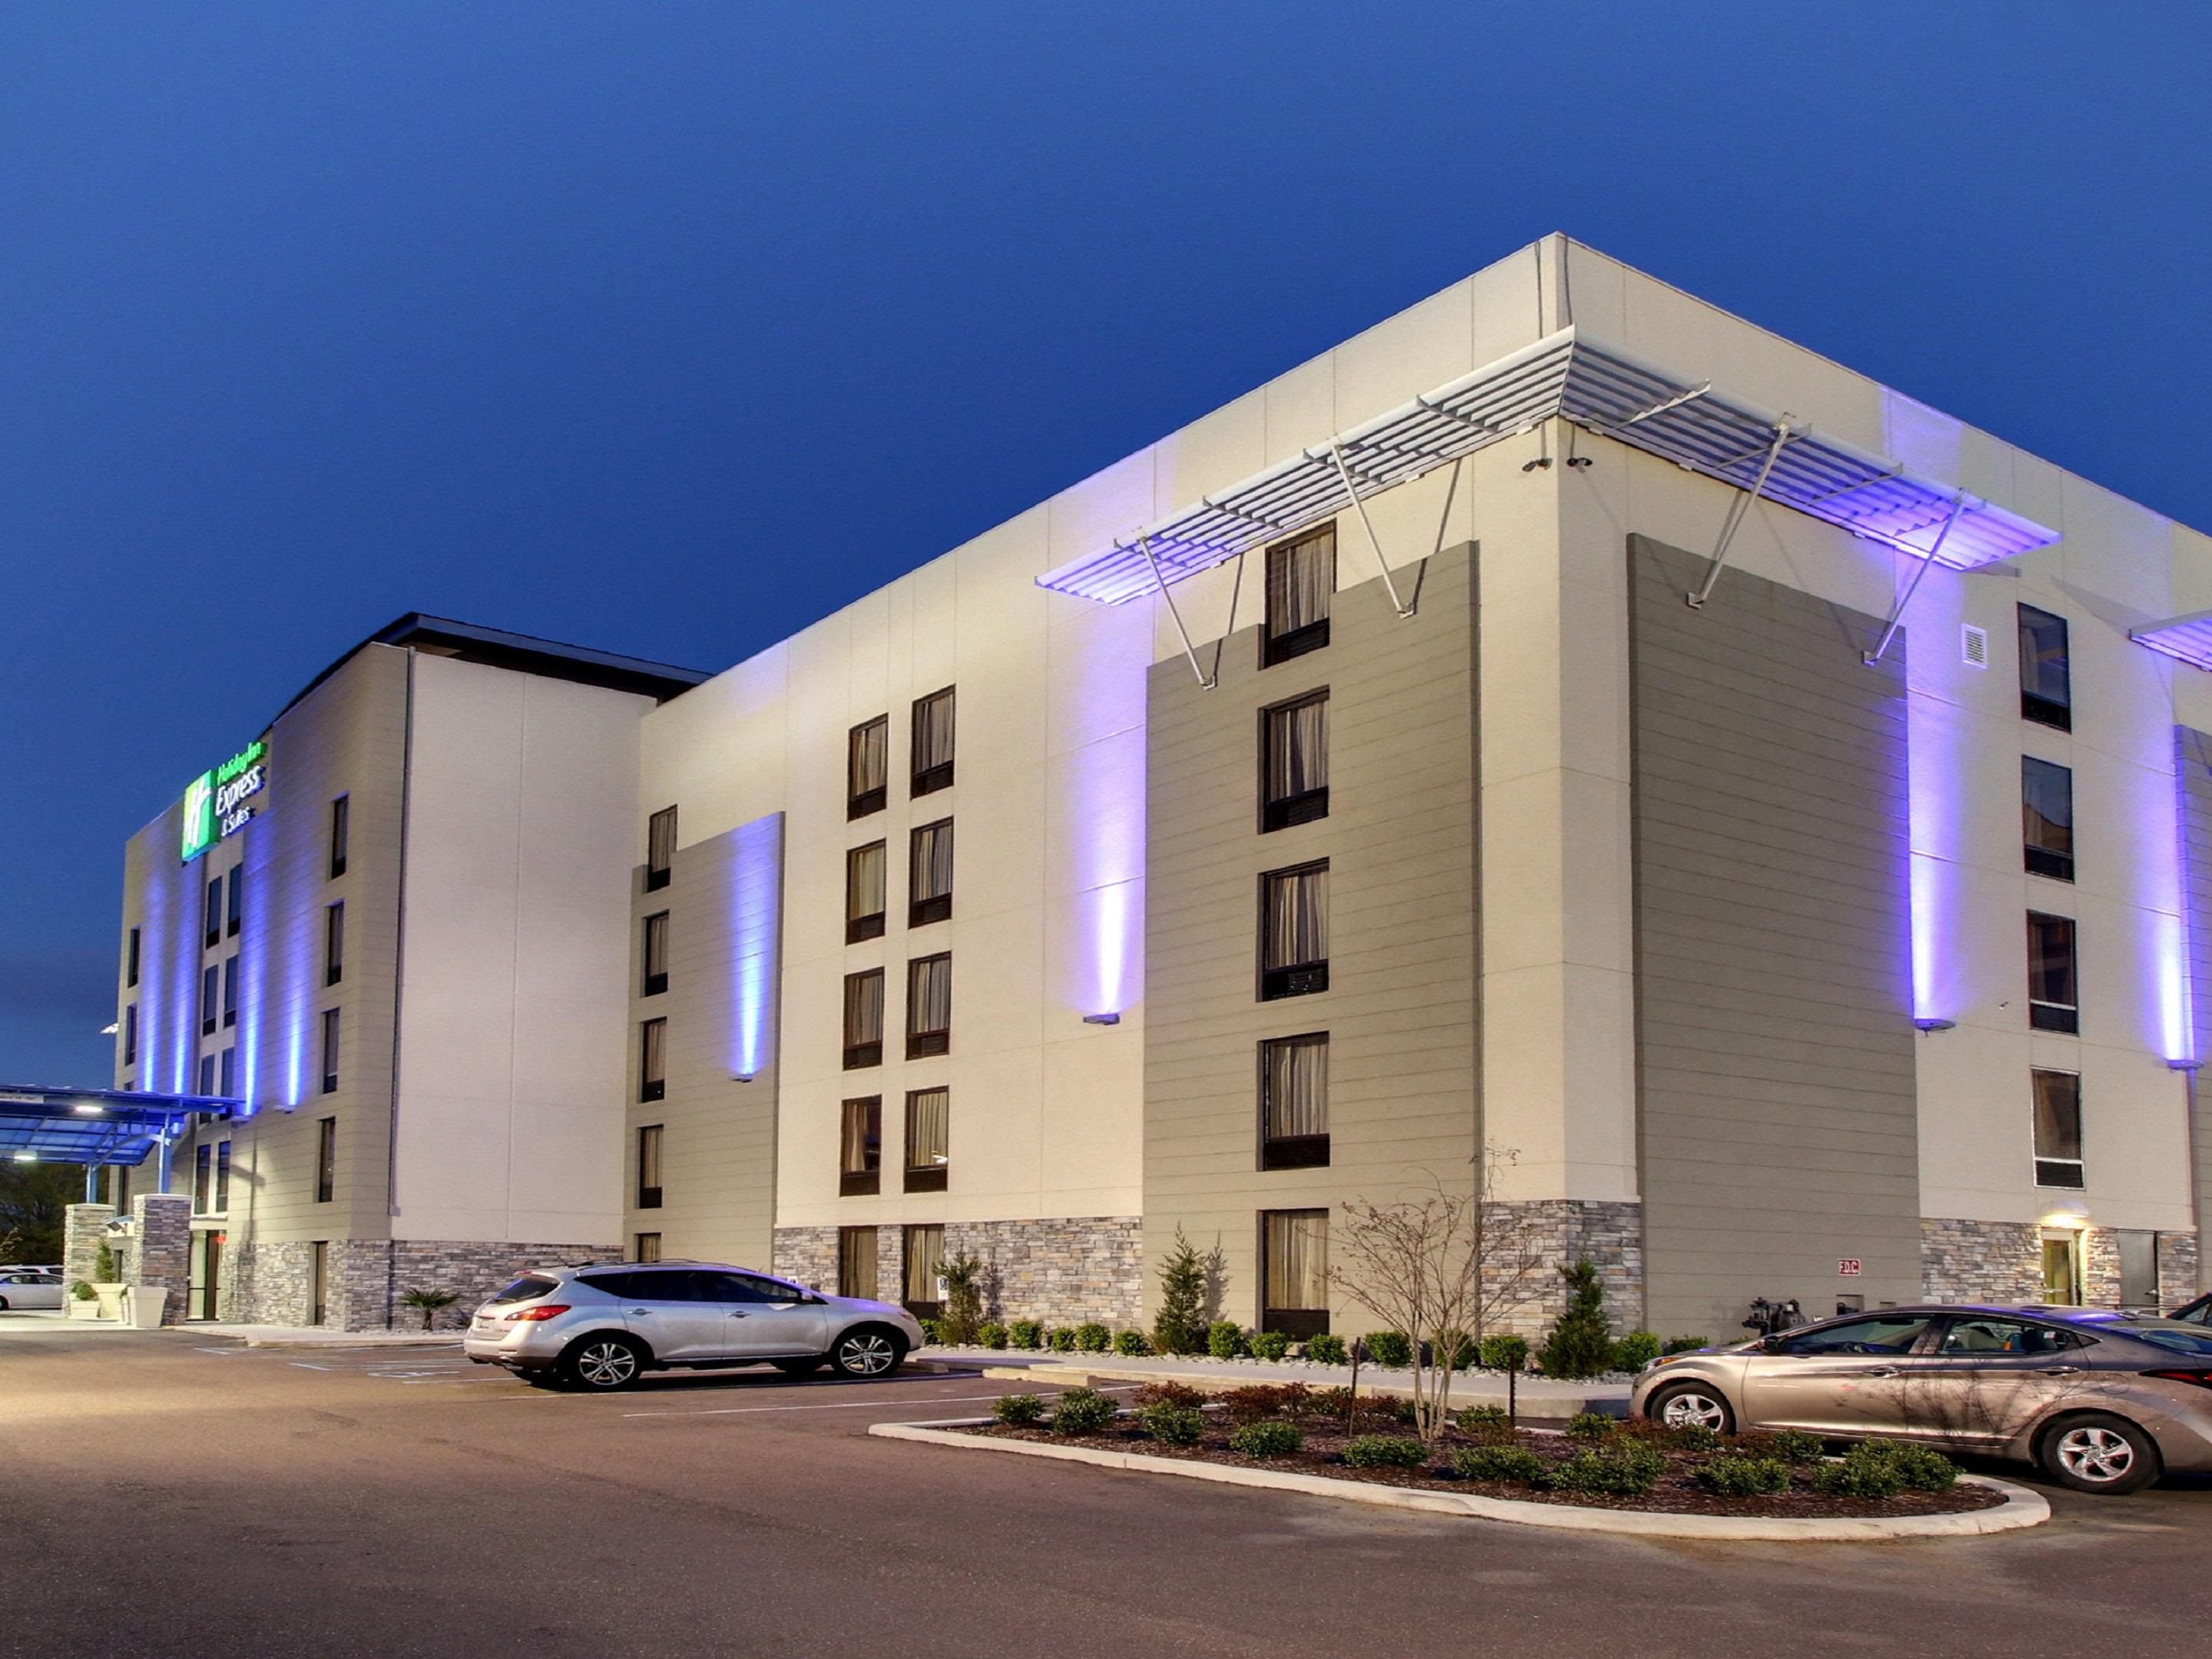 Discount 85% Off Inn At Jackson United States | A&o ...